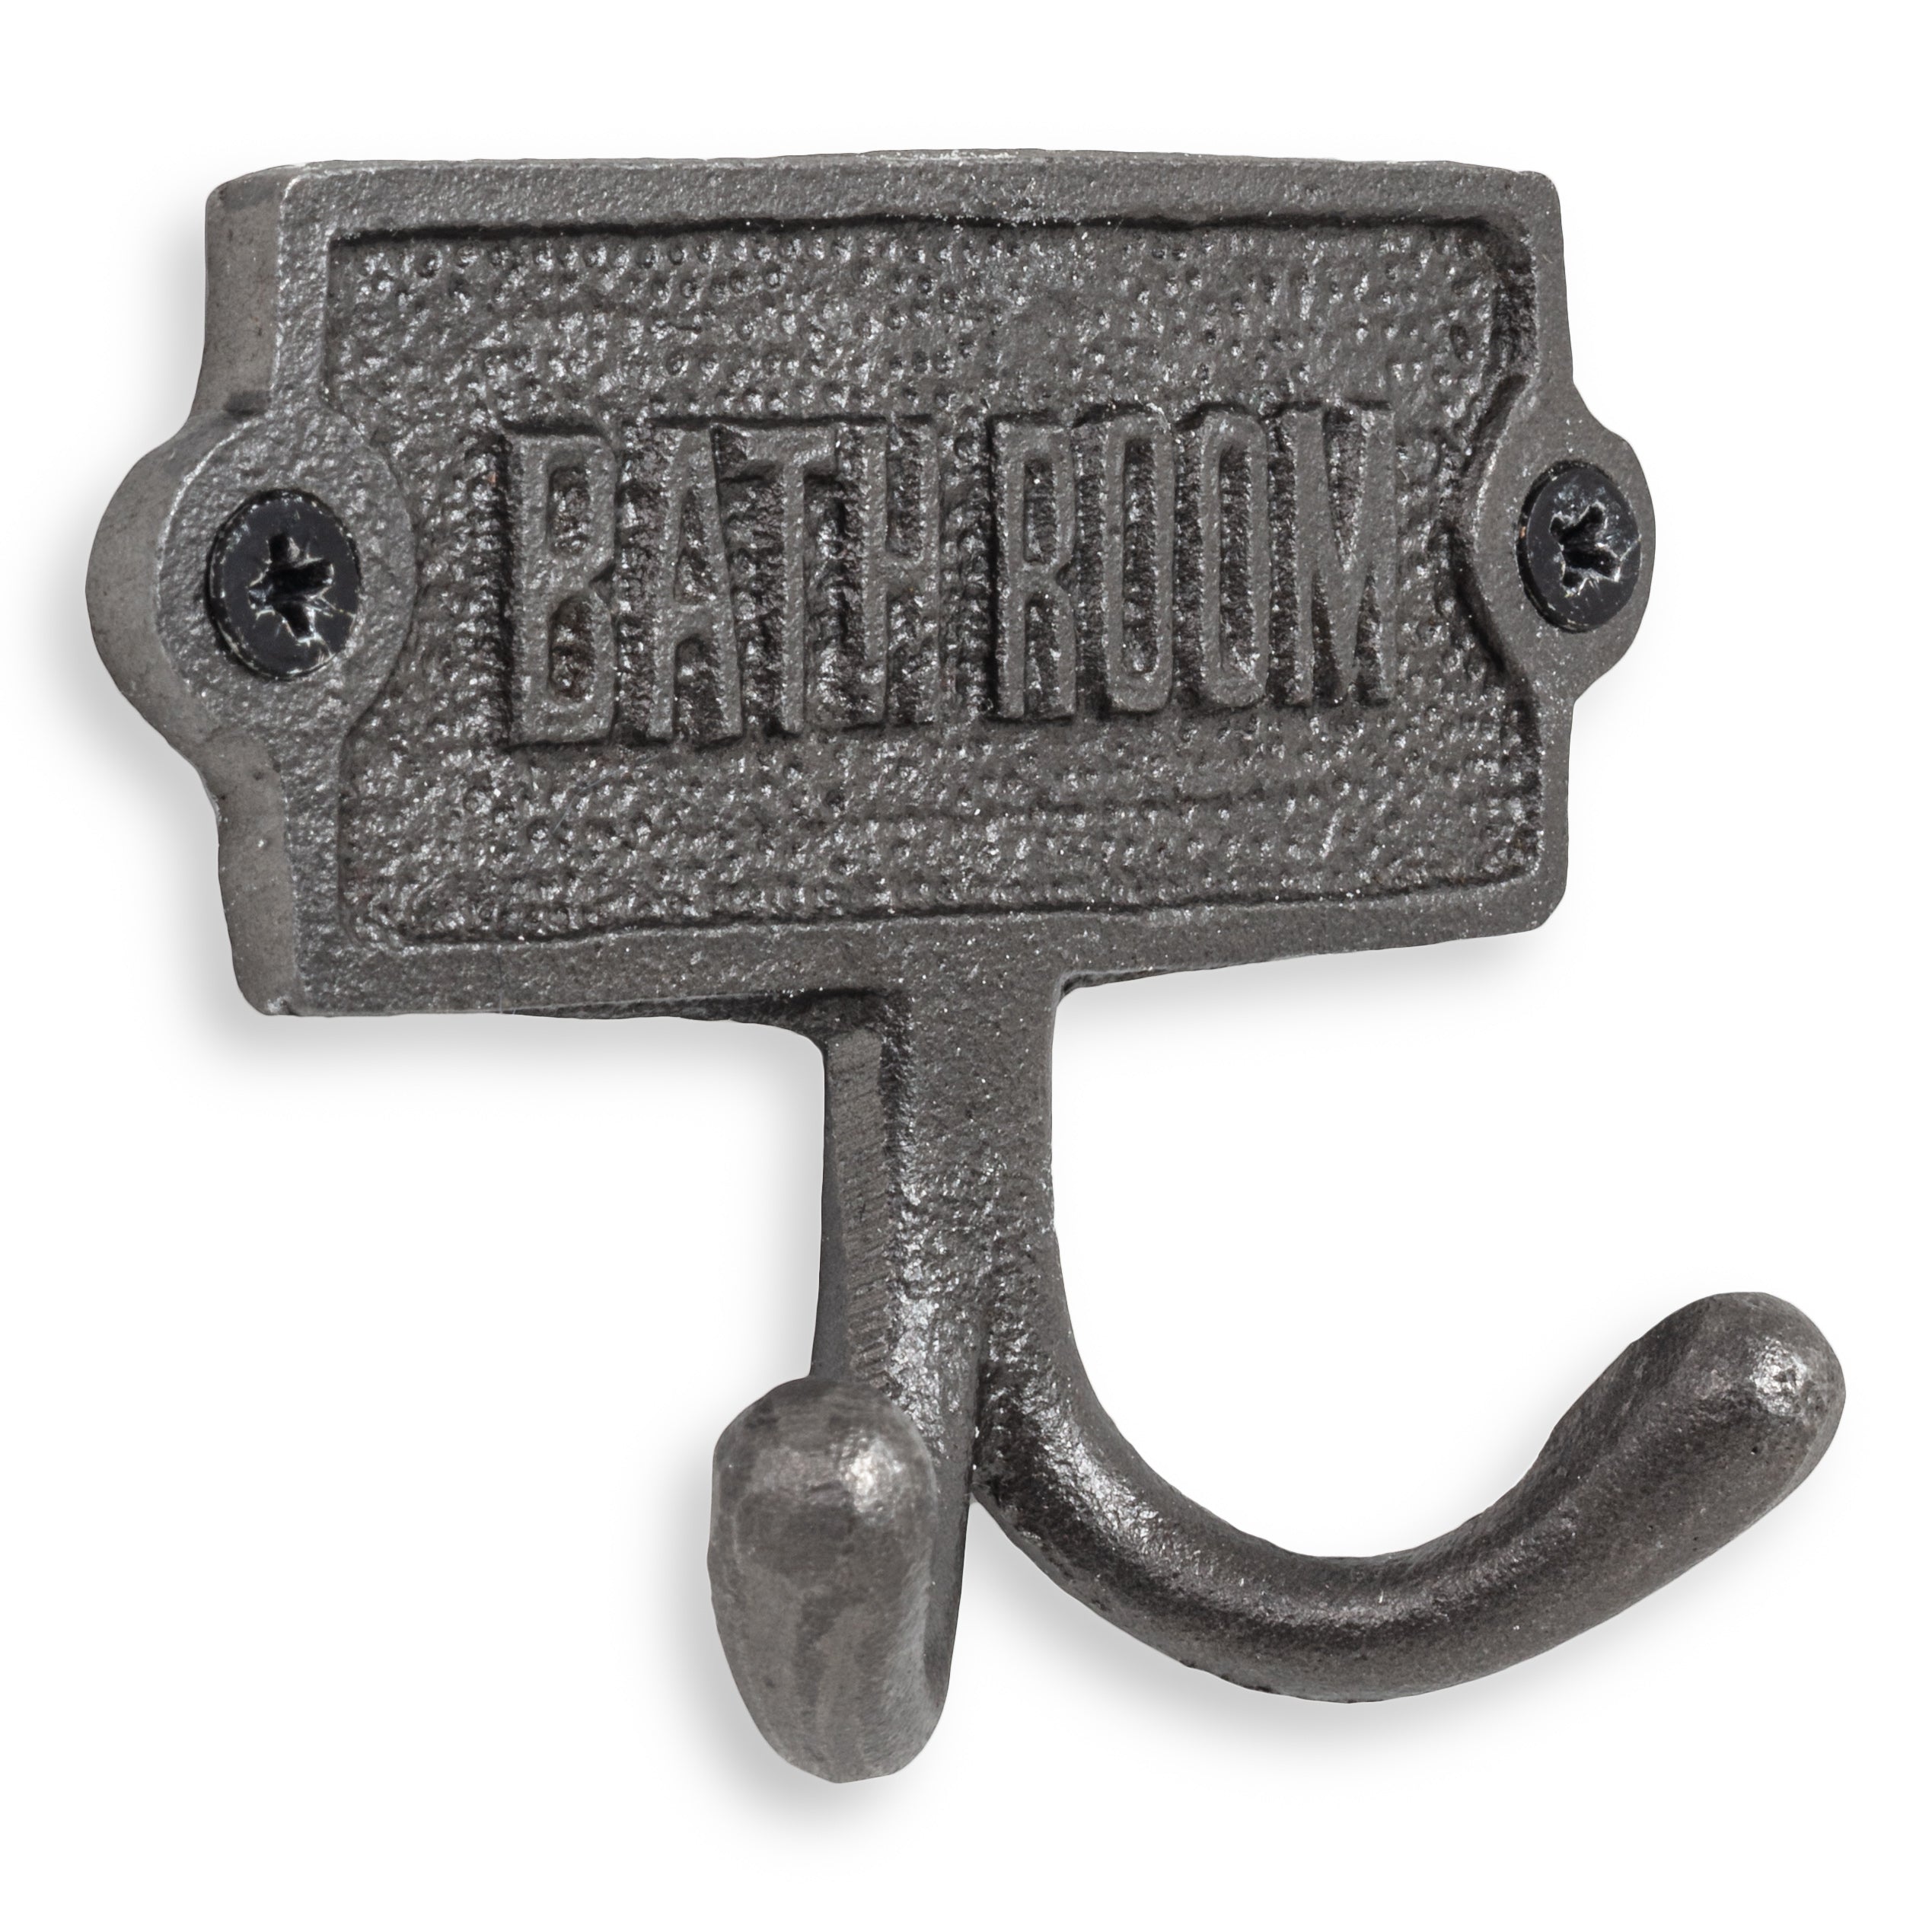 Bathroom Door Sign With Hooks - Outlet - Save 20%